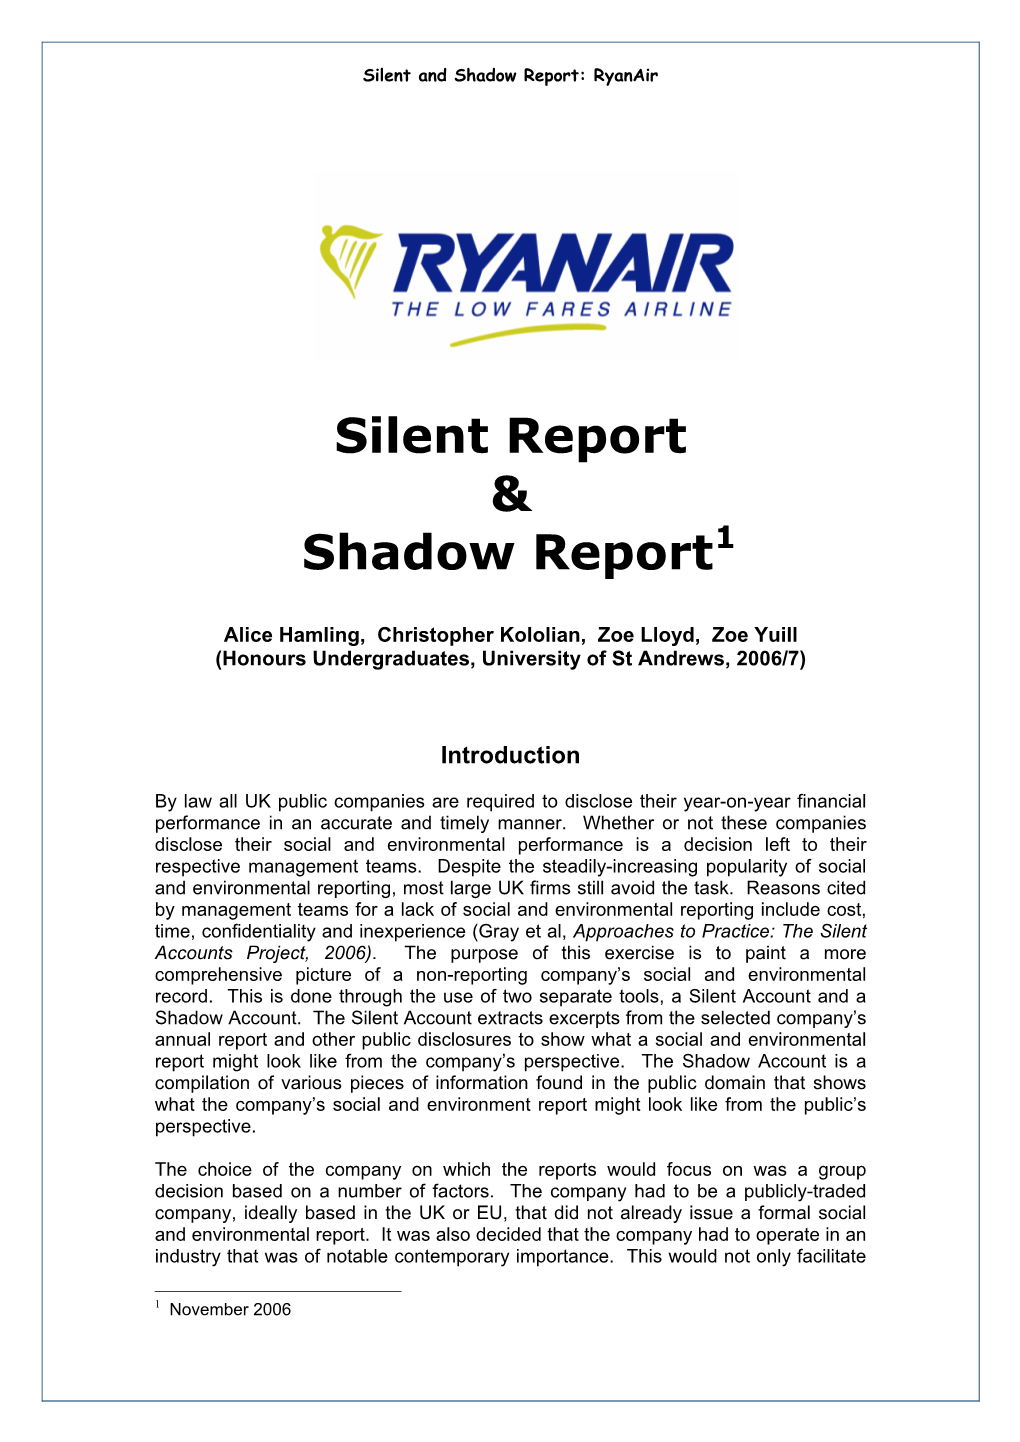 The Silent Report and Shadow Report